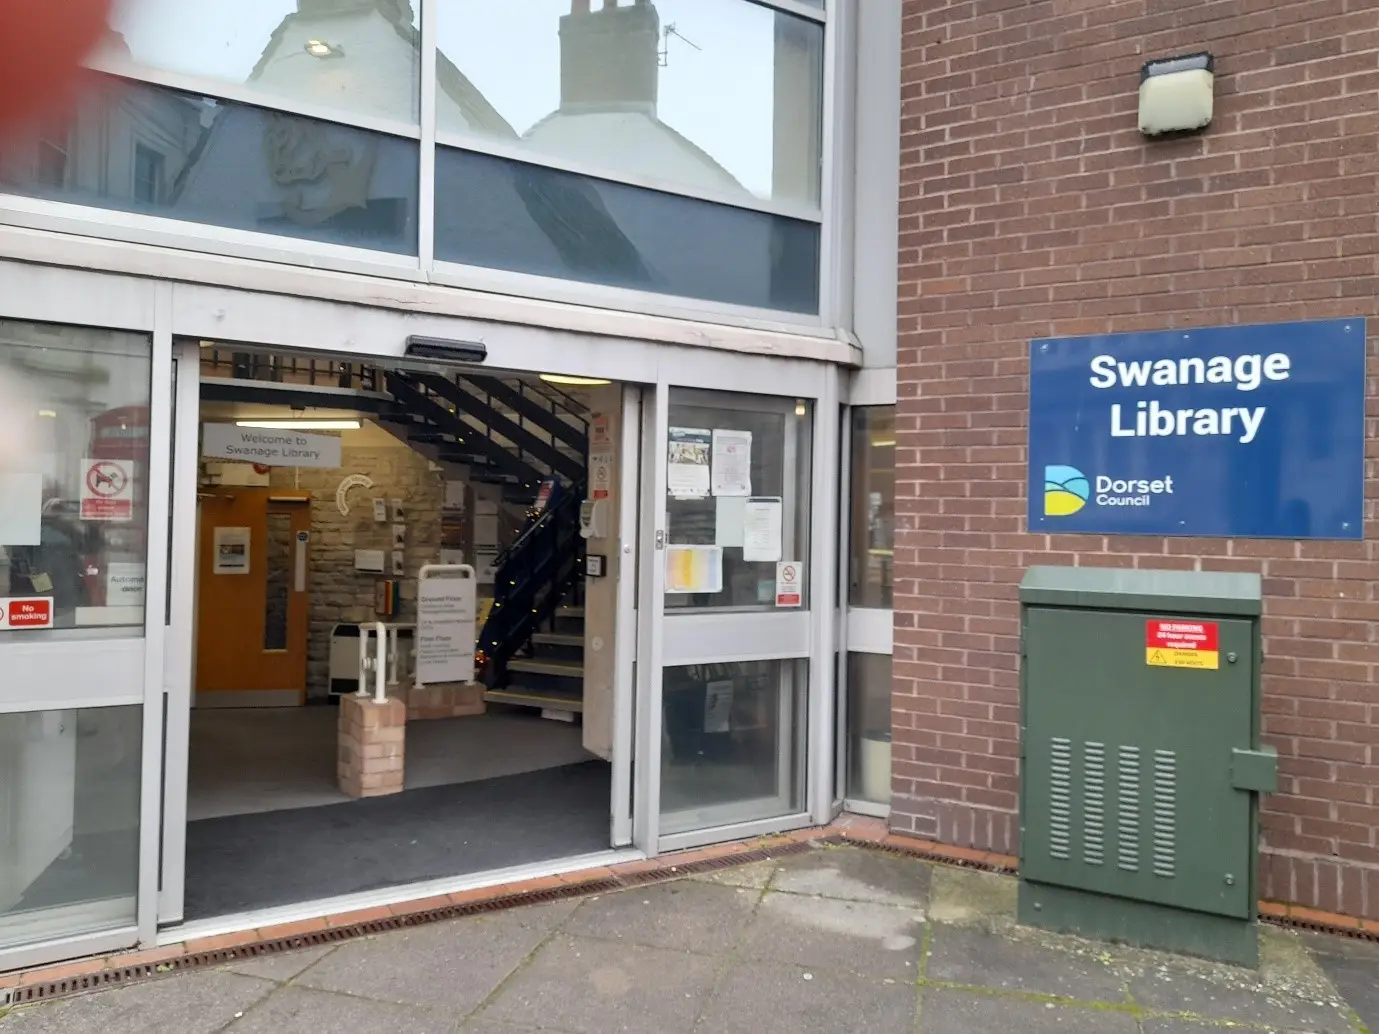 This is a picture of the entrance to Swanage Library with automatic sliding doors.